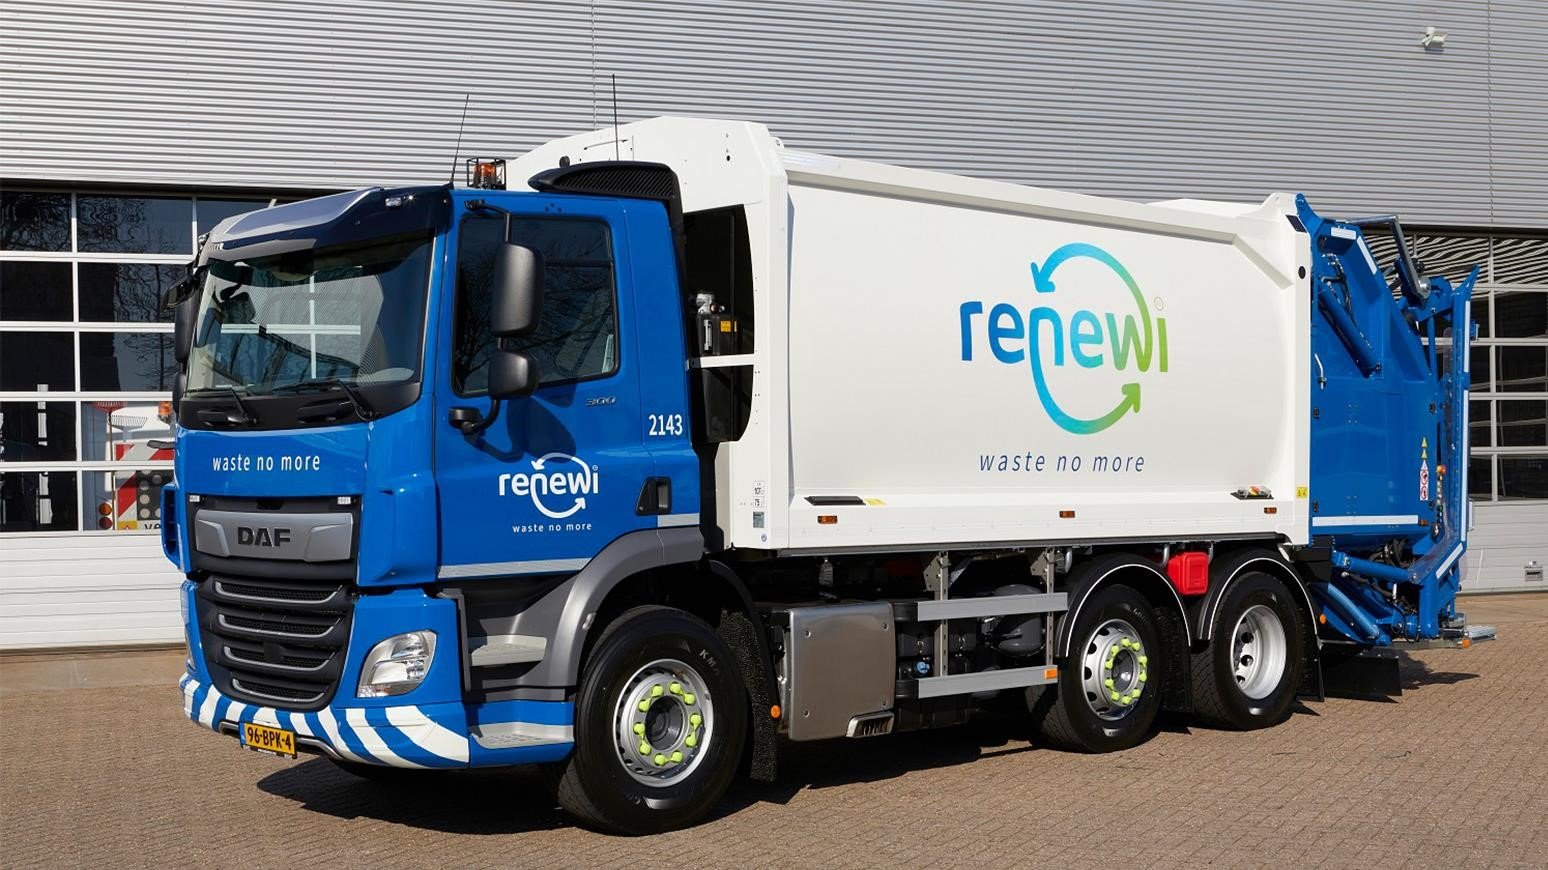 Waste-To-Product Recycling Specialist Renewi Adds 200 New DAF CF Trucks To Its 2,400-Vehicle Fleet